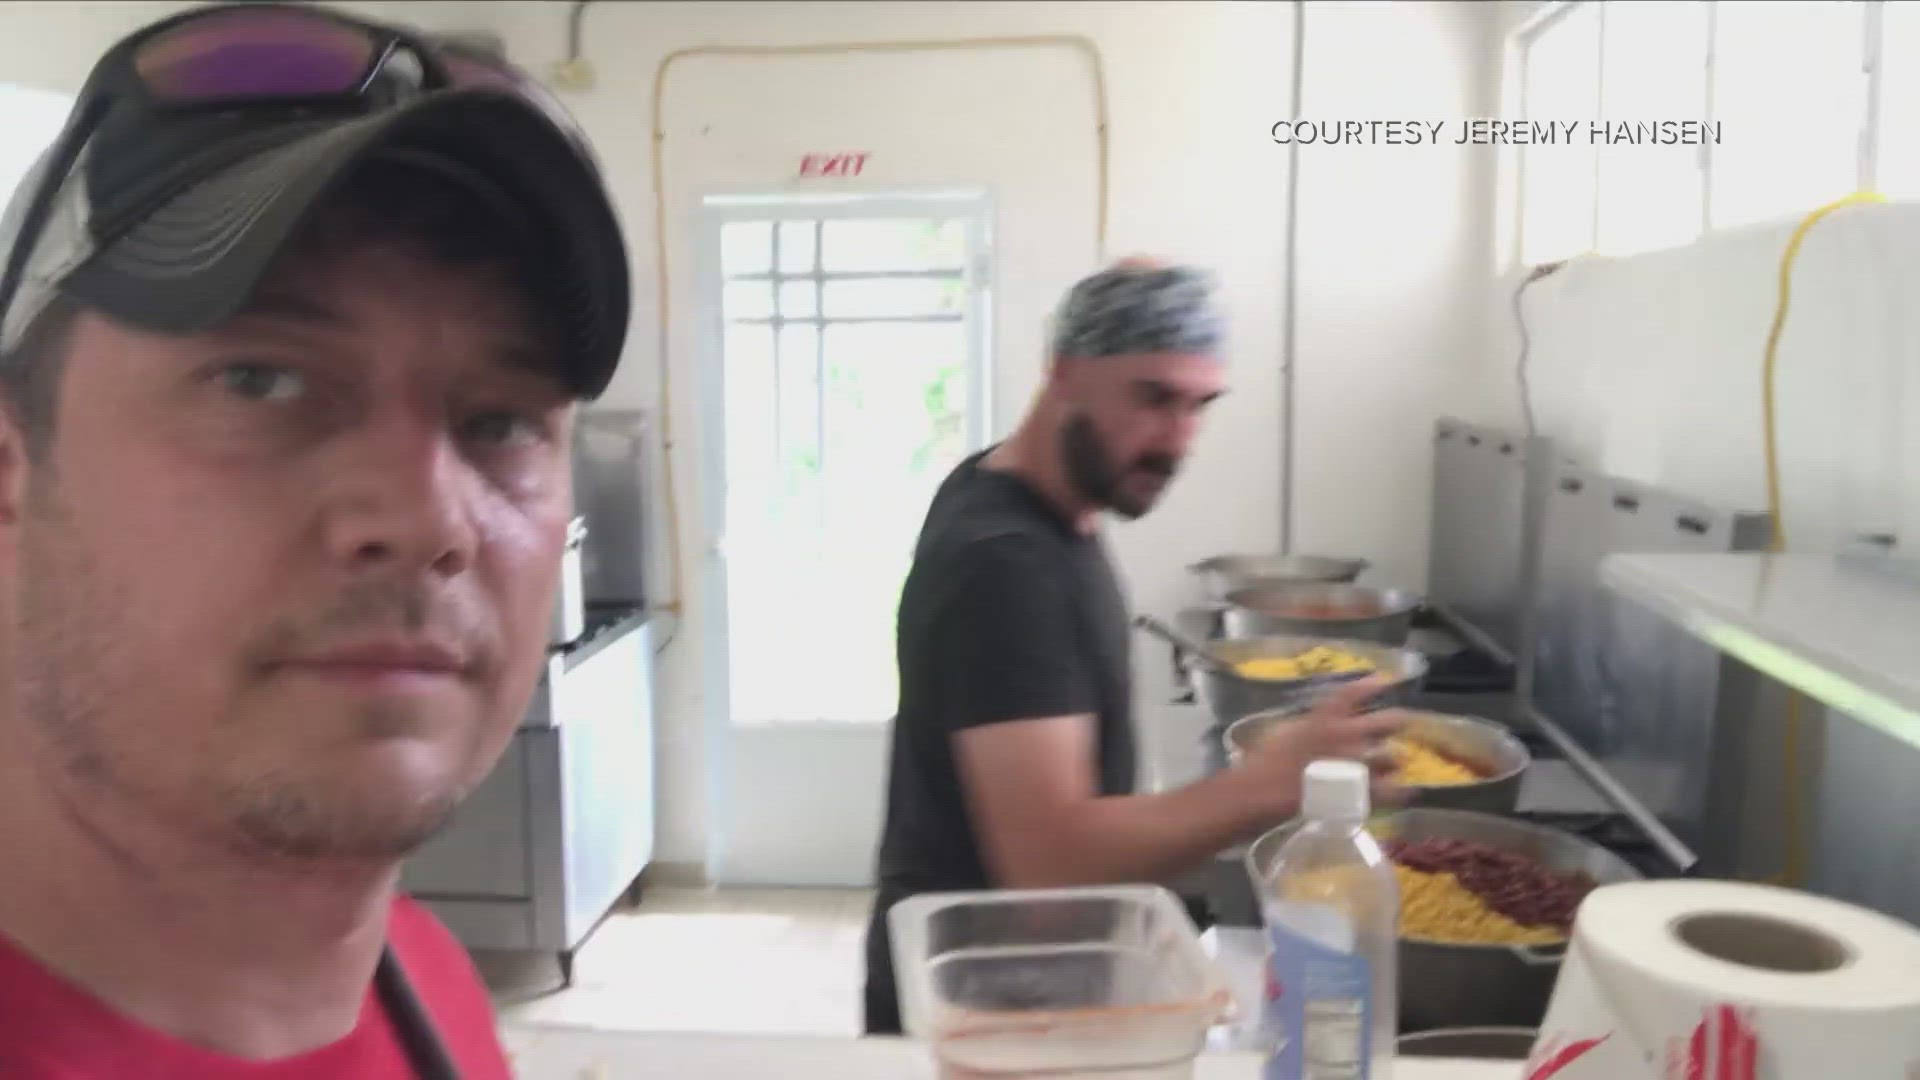 Former Spokane chef Jeremy Hansen said his two months handing out meals to communities in crisis gave him a unique perspective on the crisis in Gaza.